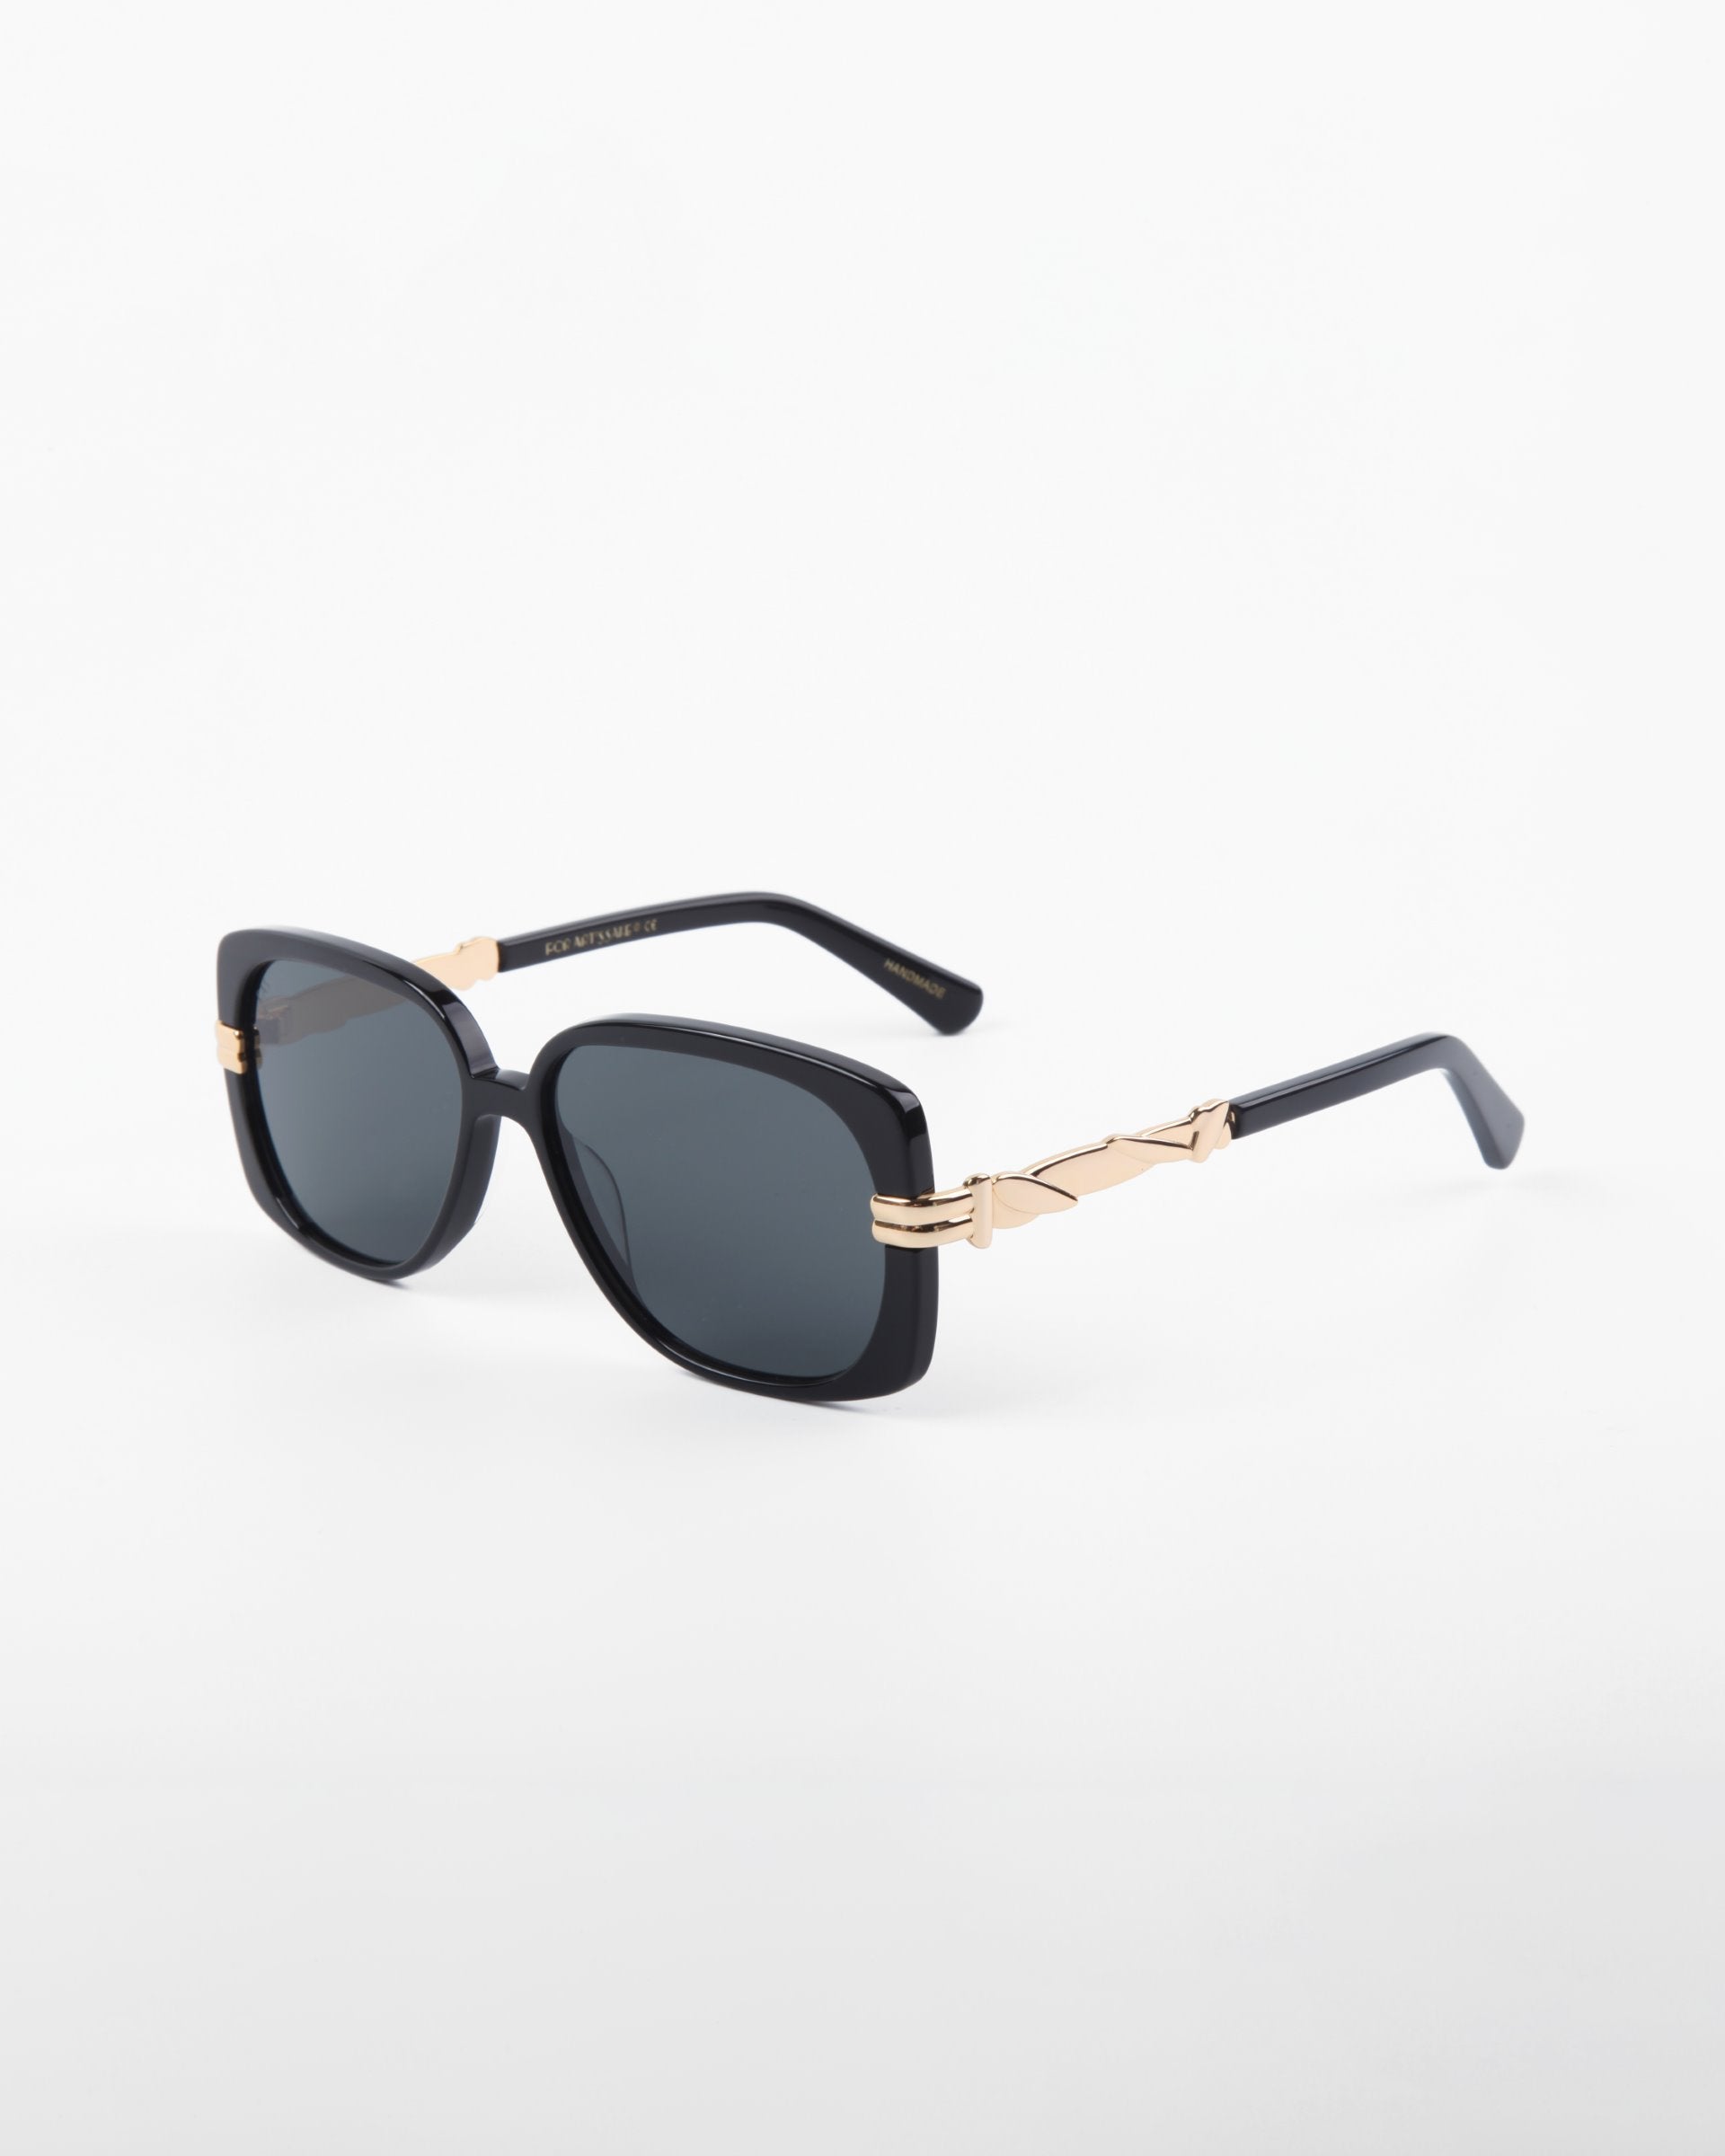 A pair of black square-framed Icon sunglasses by For Art's Sake® with dark, shatter-resistant nylon lenses. The temples feature gold accents near the hinges. Offering UVA & UVB protection, they are perfect for sunny days. The background is plain and white.